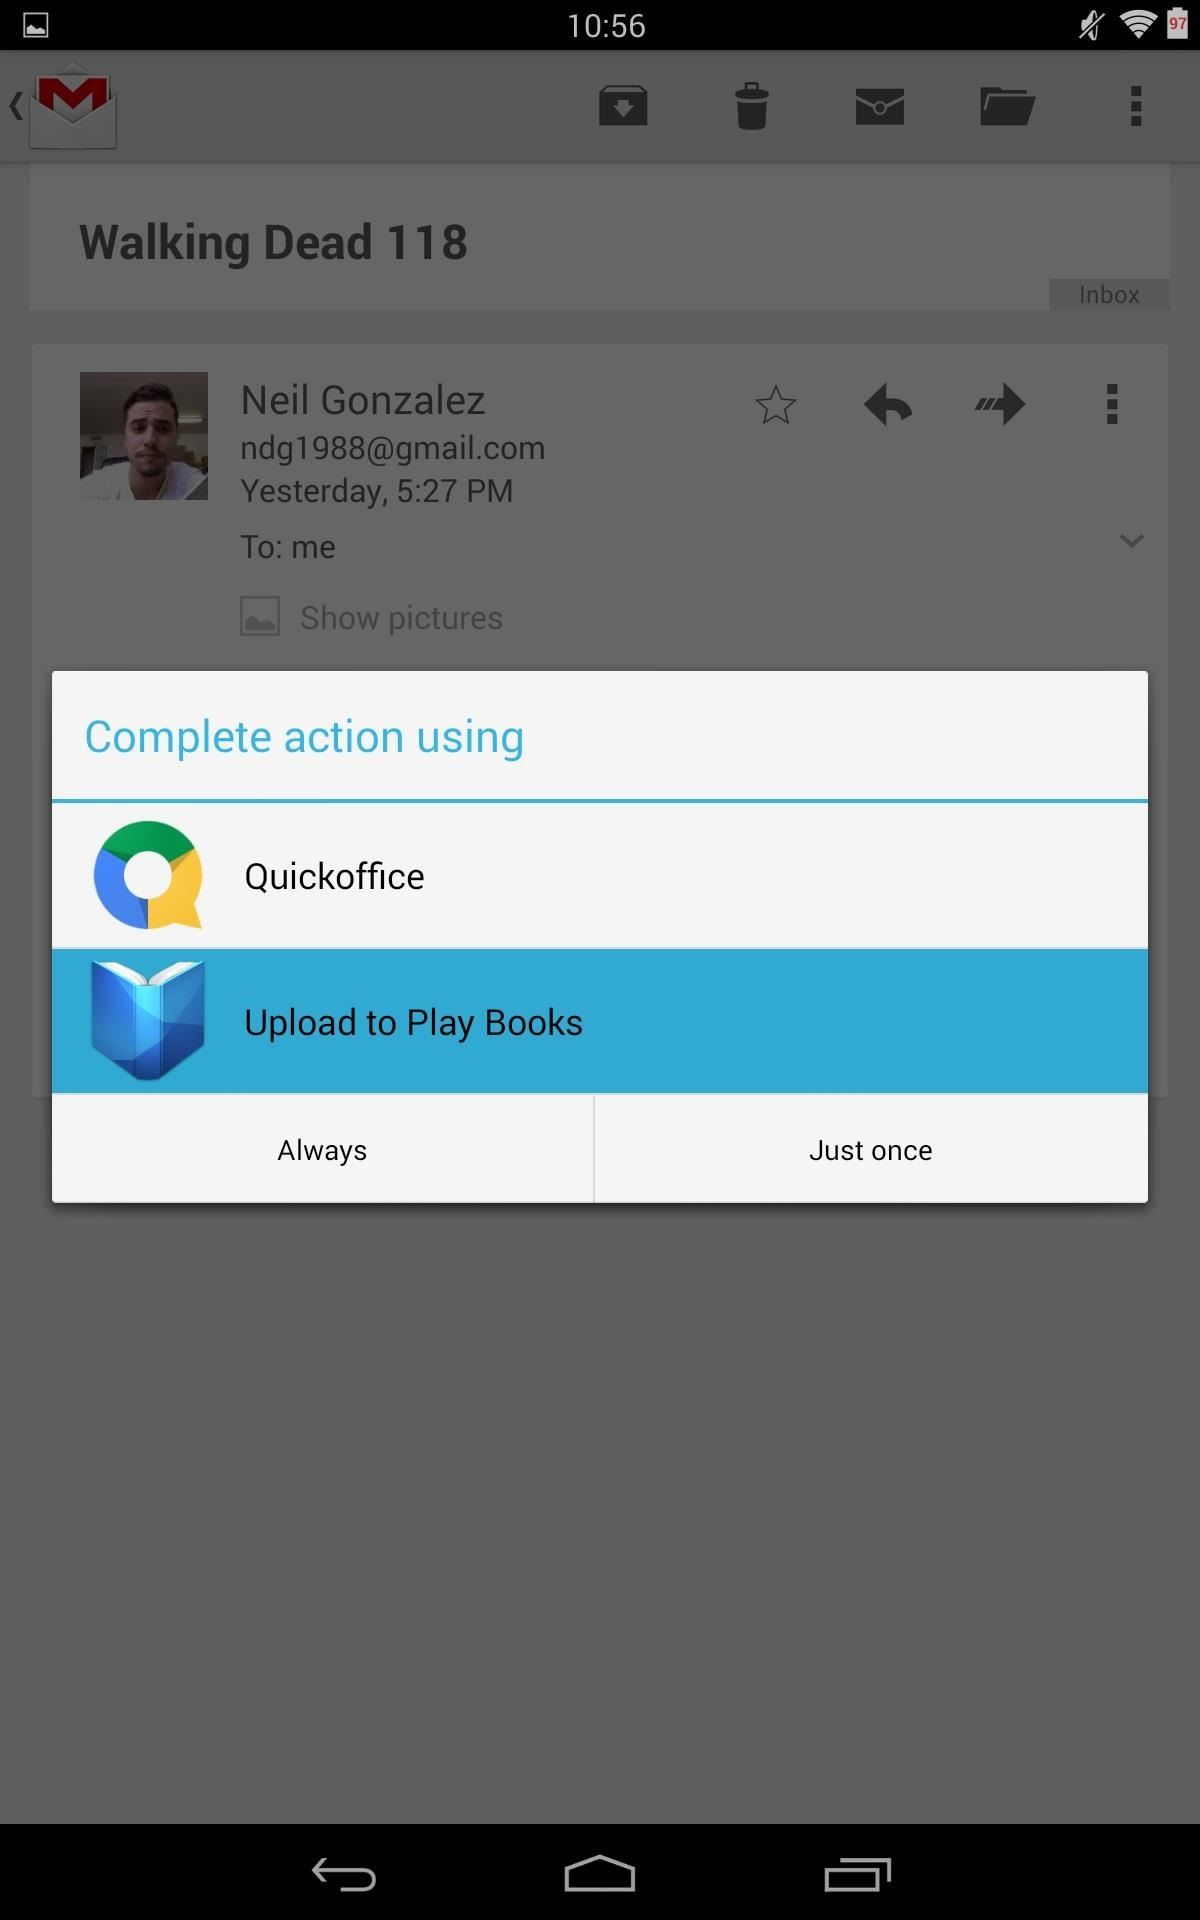 How to Upload Your eBook Collection to Your Nexus 7 Tablet Using Google Play Books